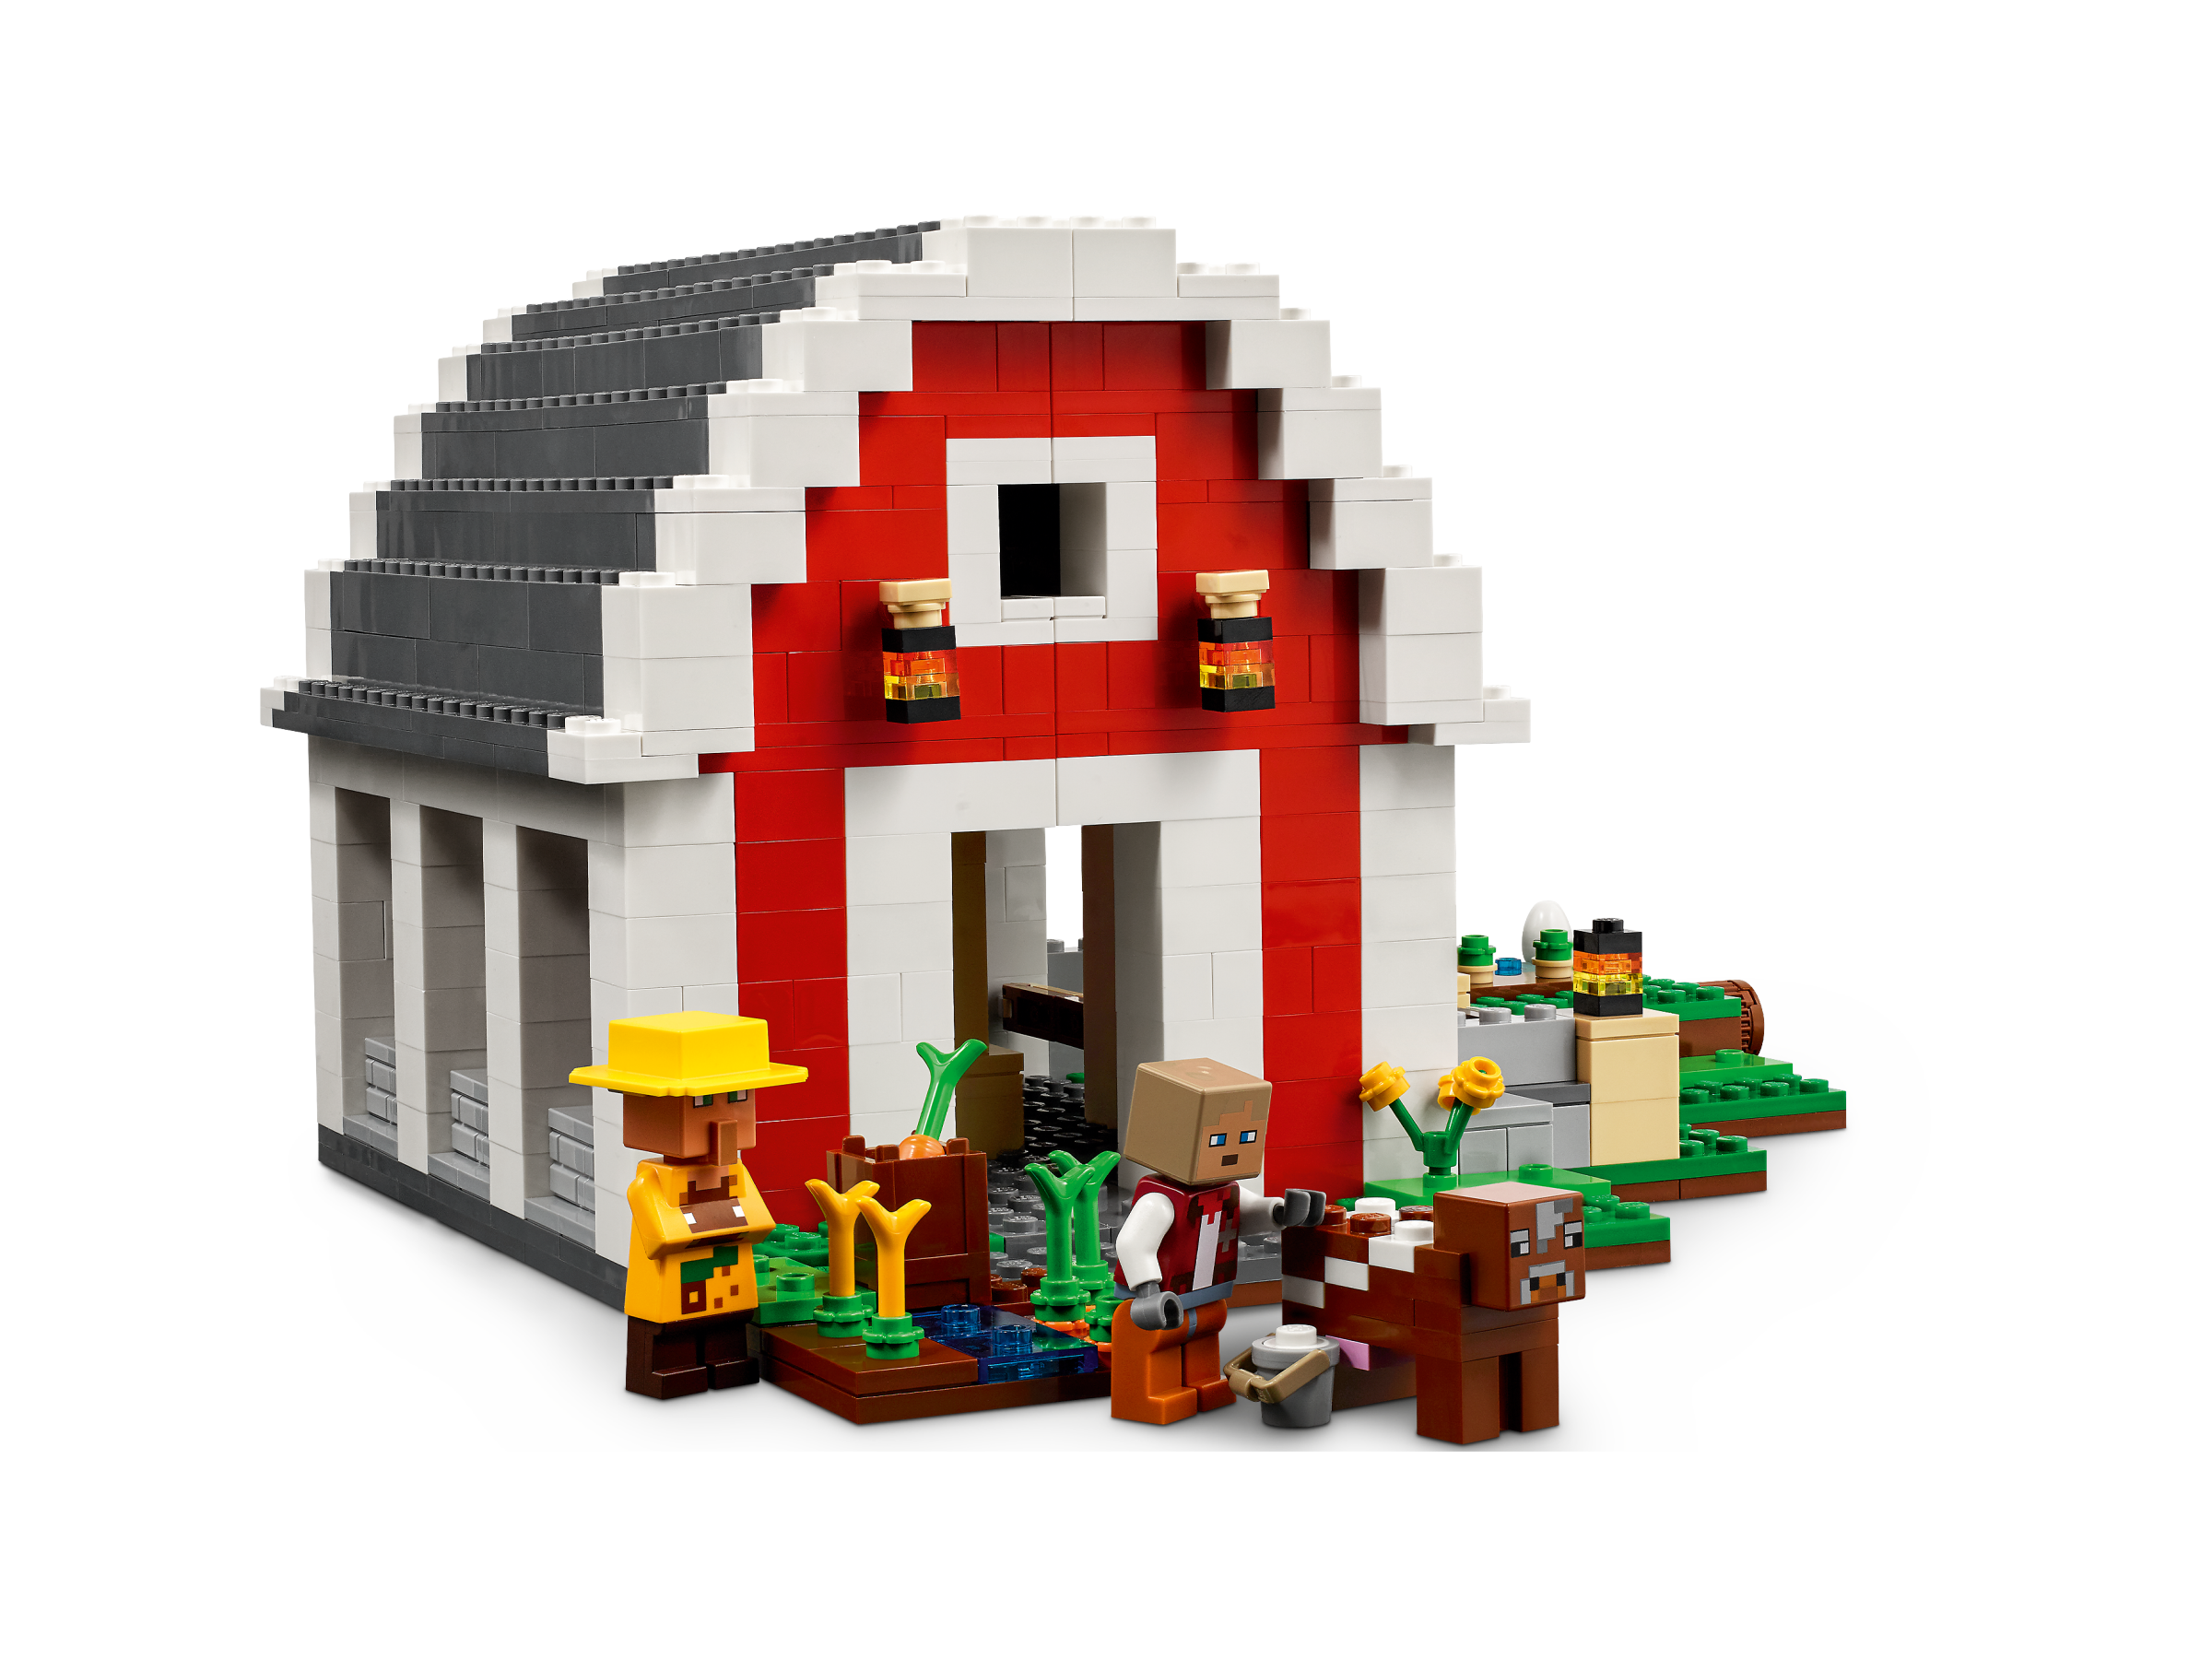 The Red Barn 21187 Minecraft® | Buy online at the Official Shop GB